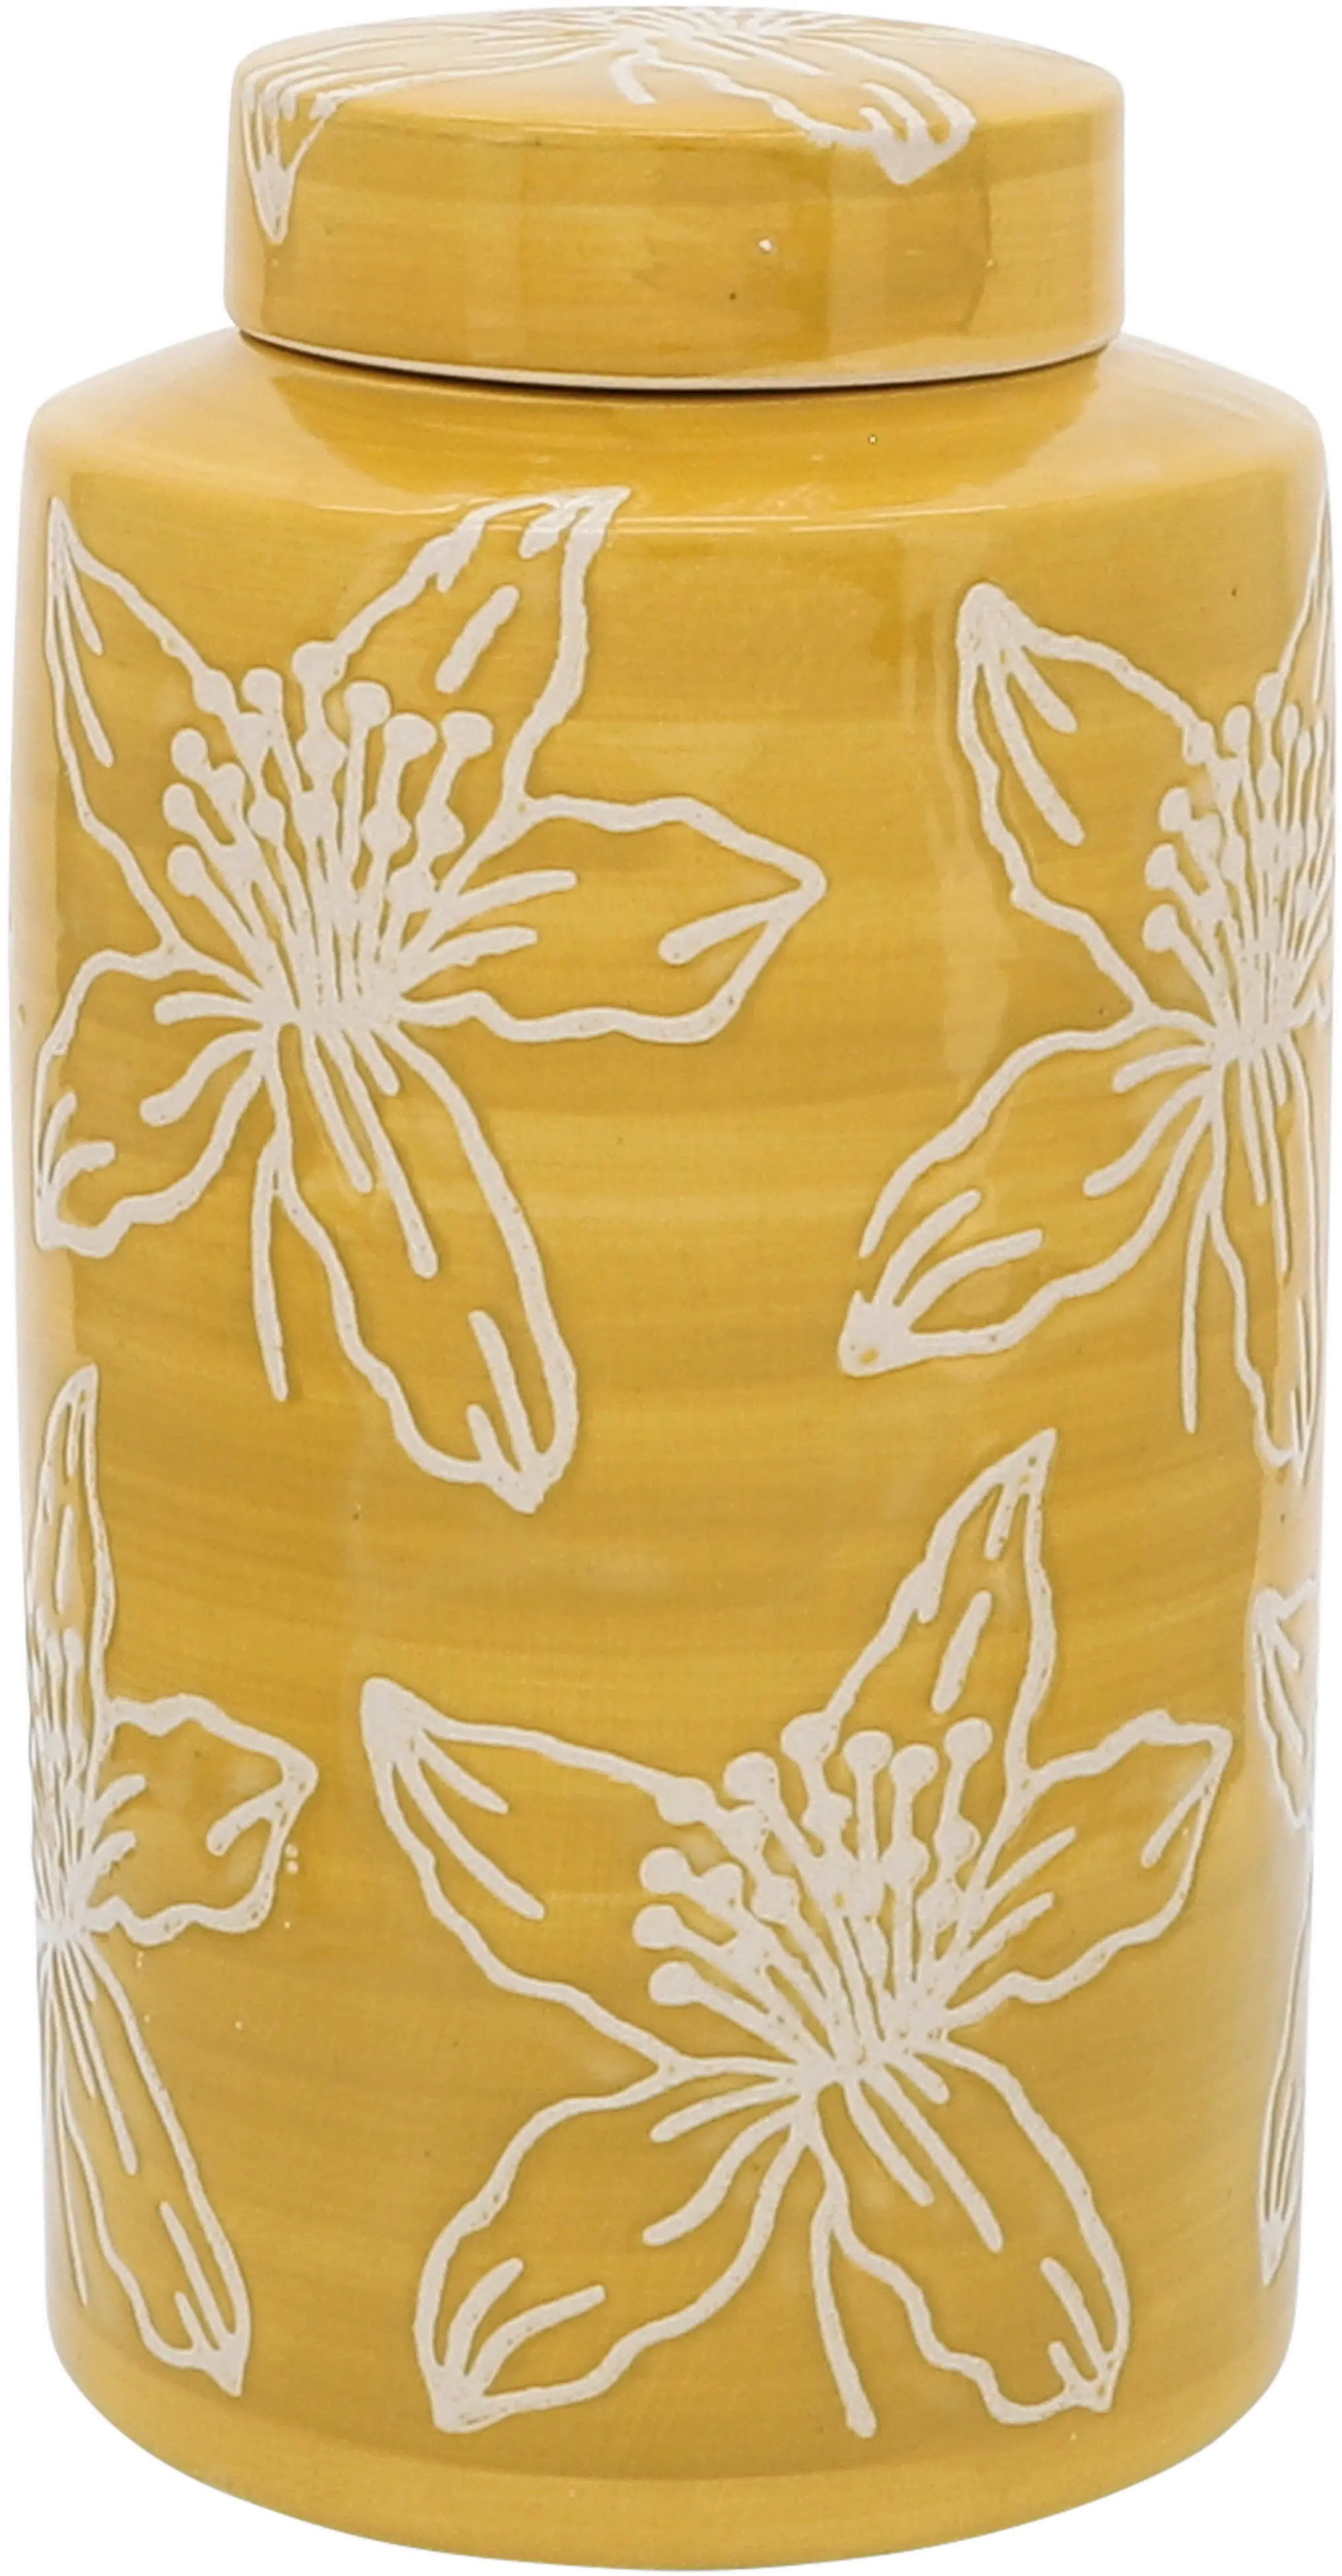 10 Inch Yellow Floral Jar with Lid